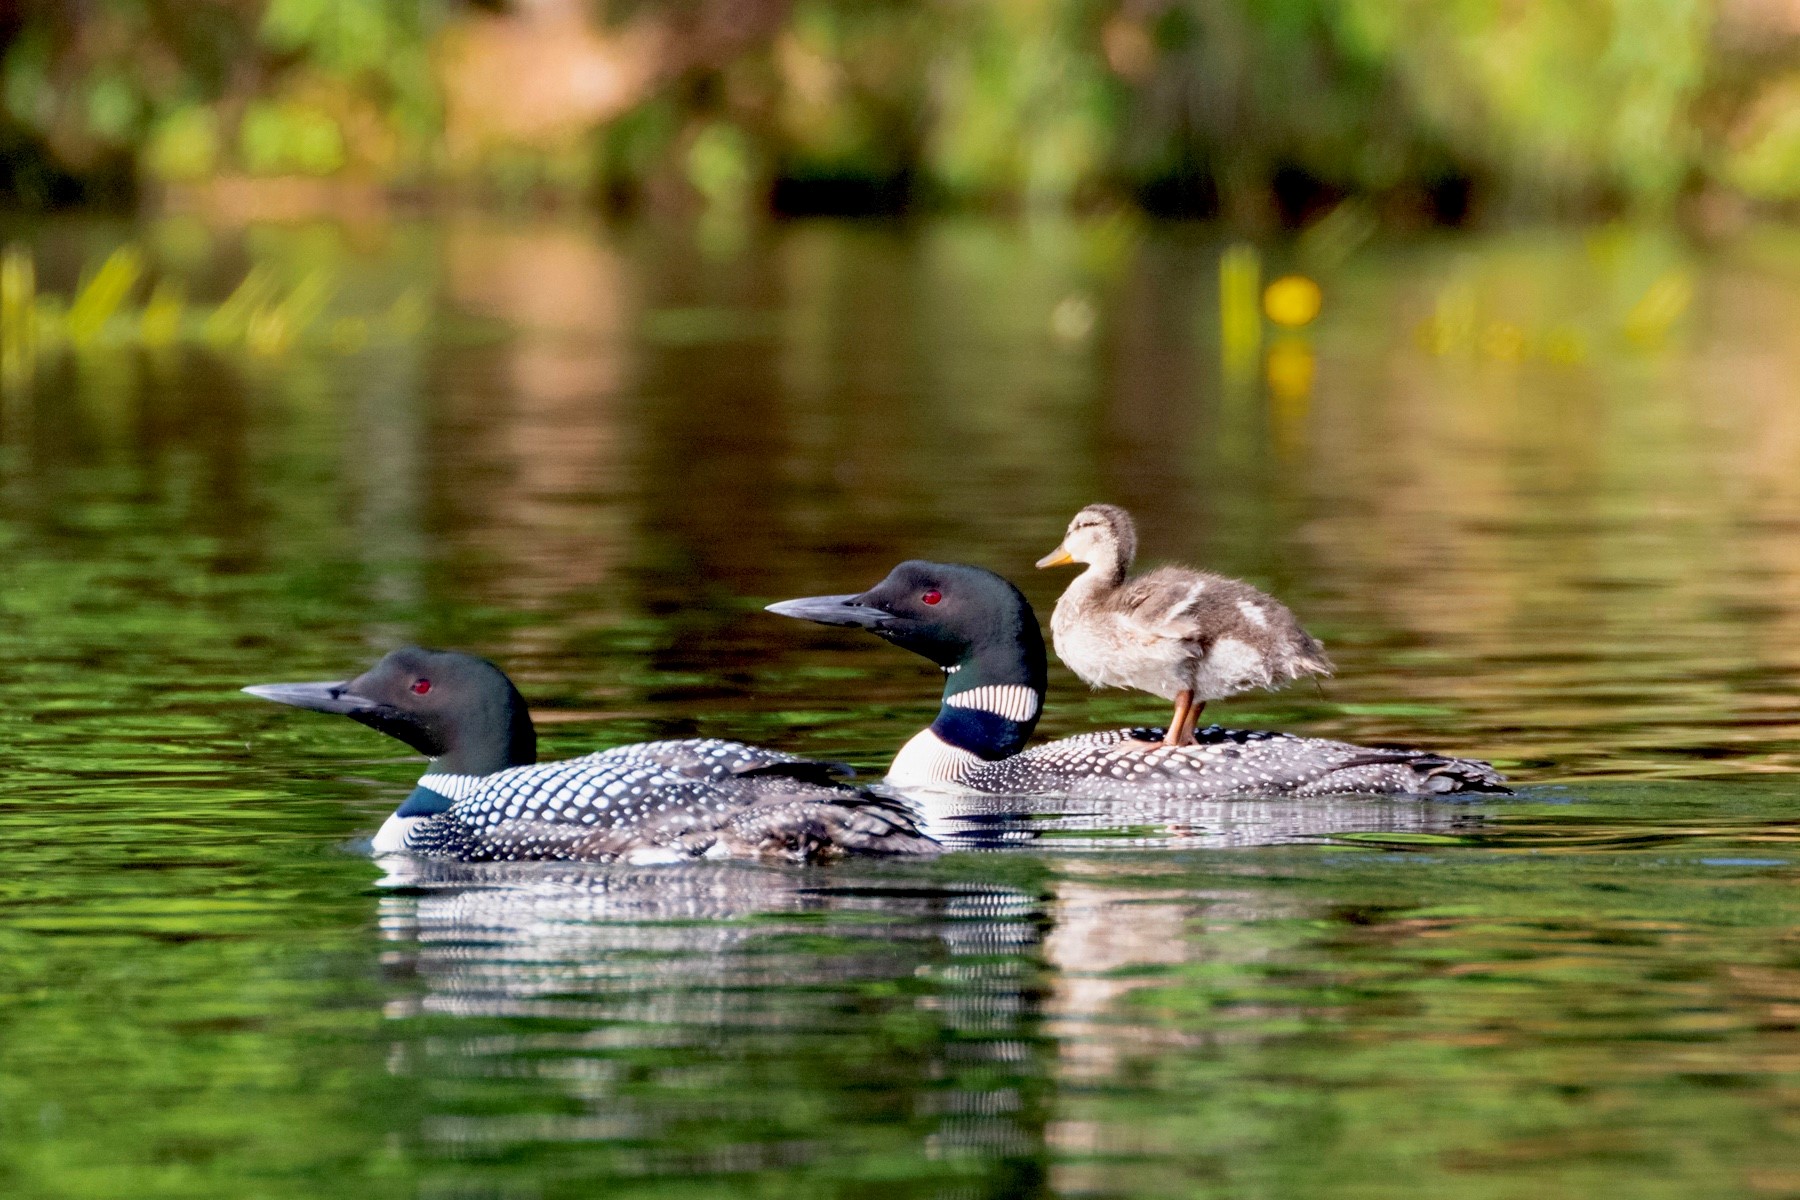 duckling rides the back of its loon parent